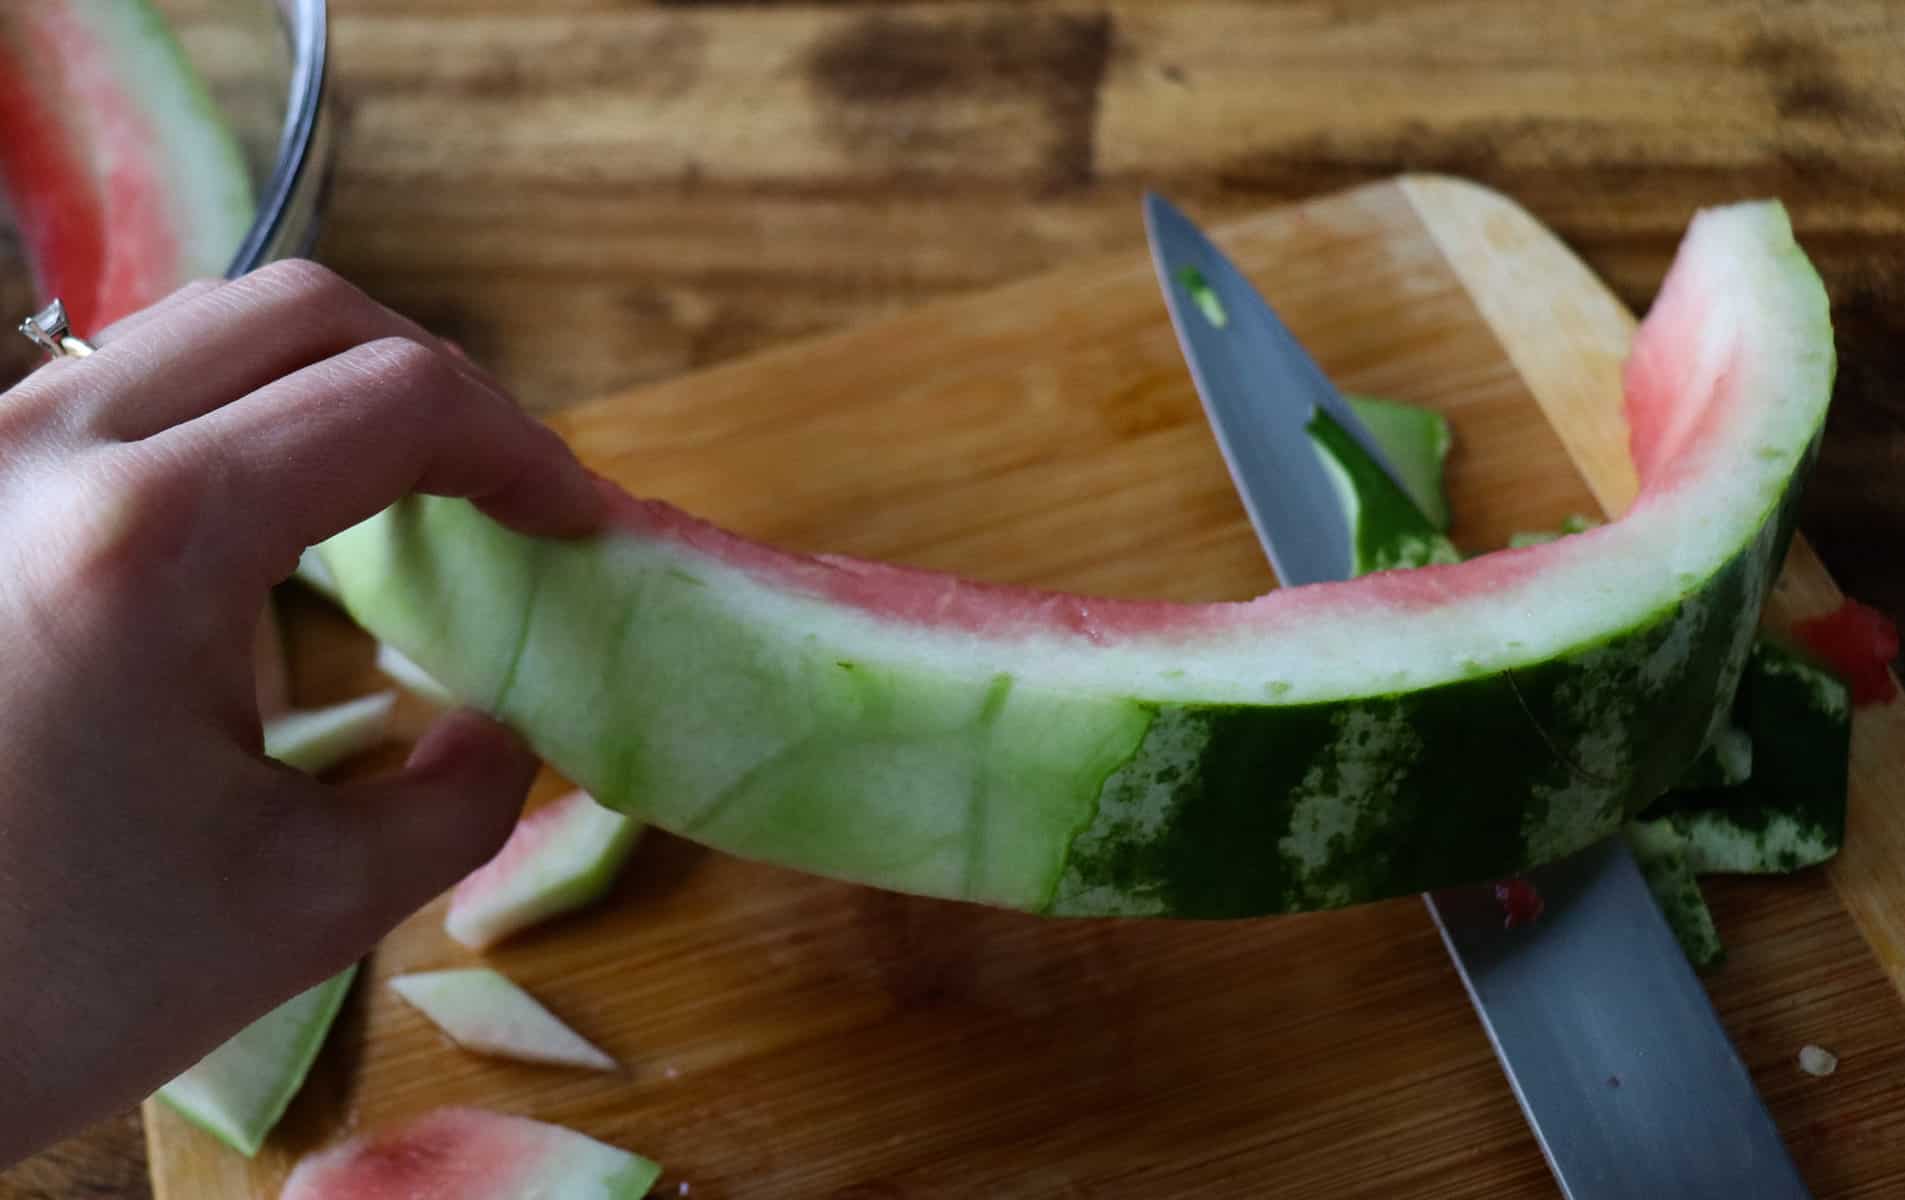 half of the watermelon rind has the outer skin removed. the other half still has it on